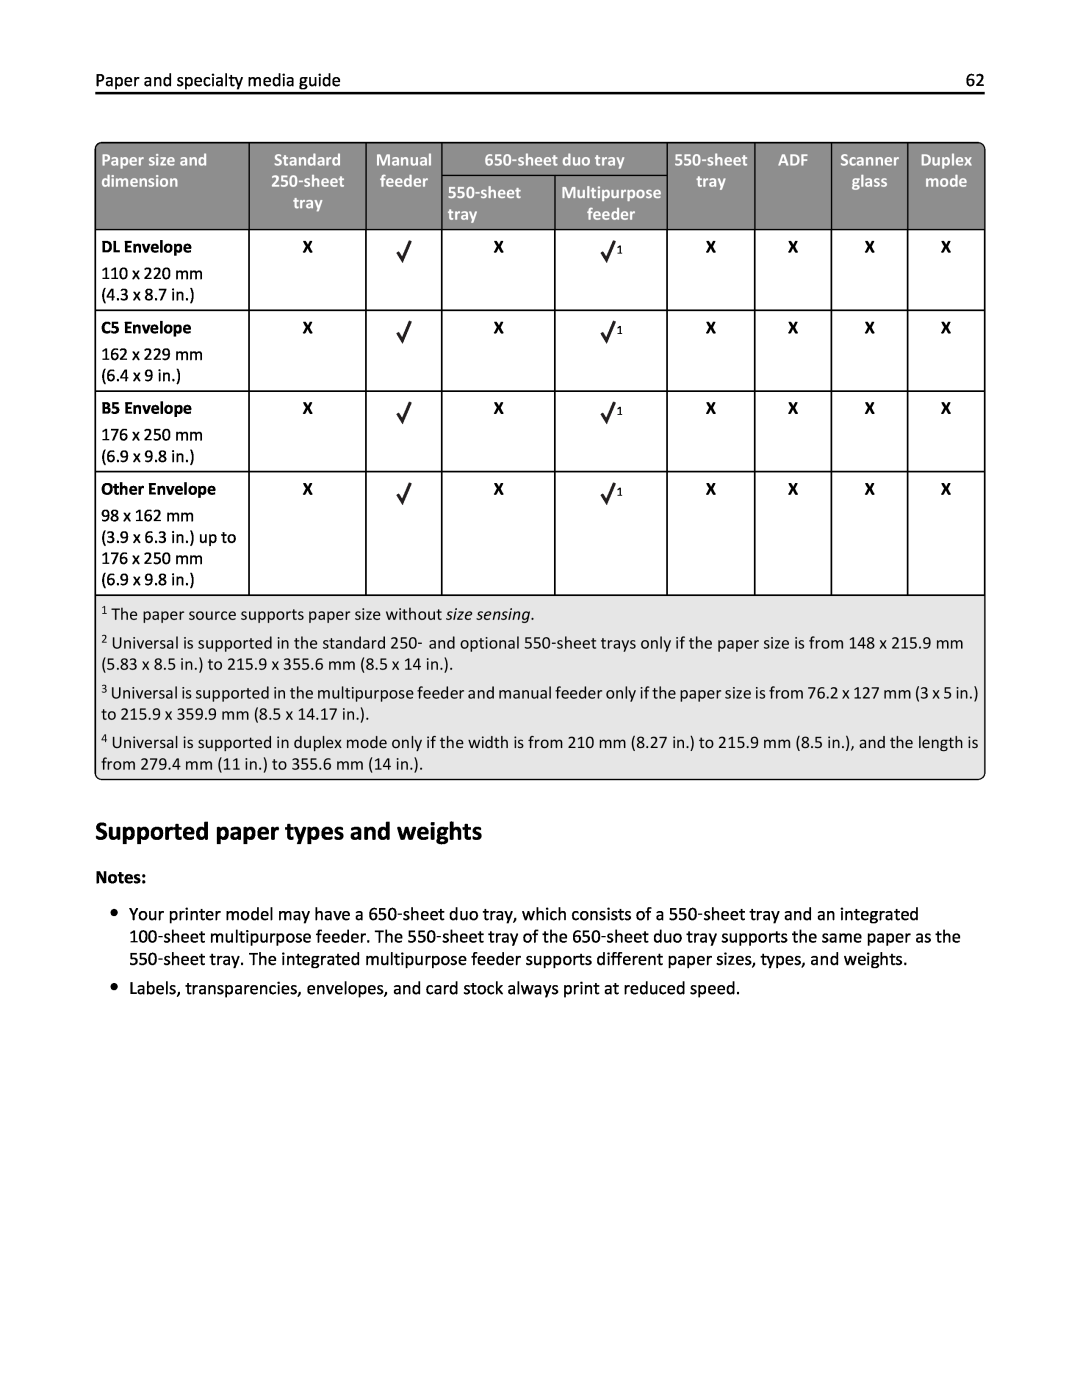 Lexmark 436 manual Supported paper types and weights 